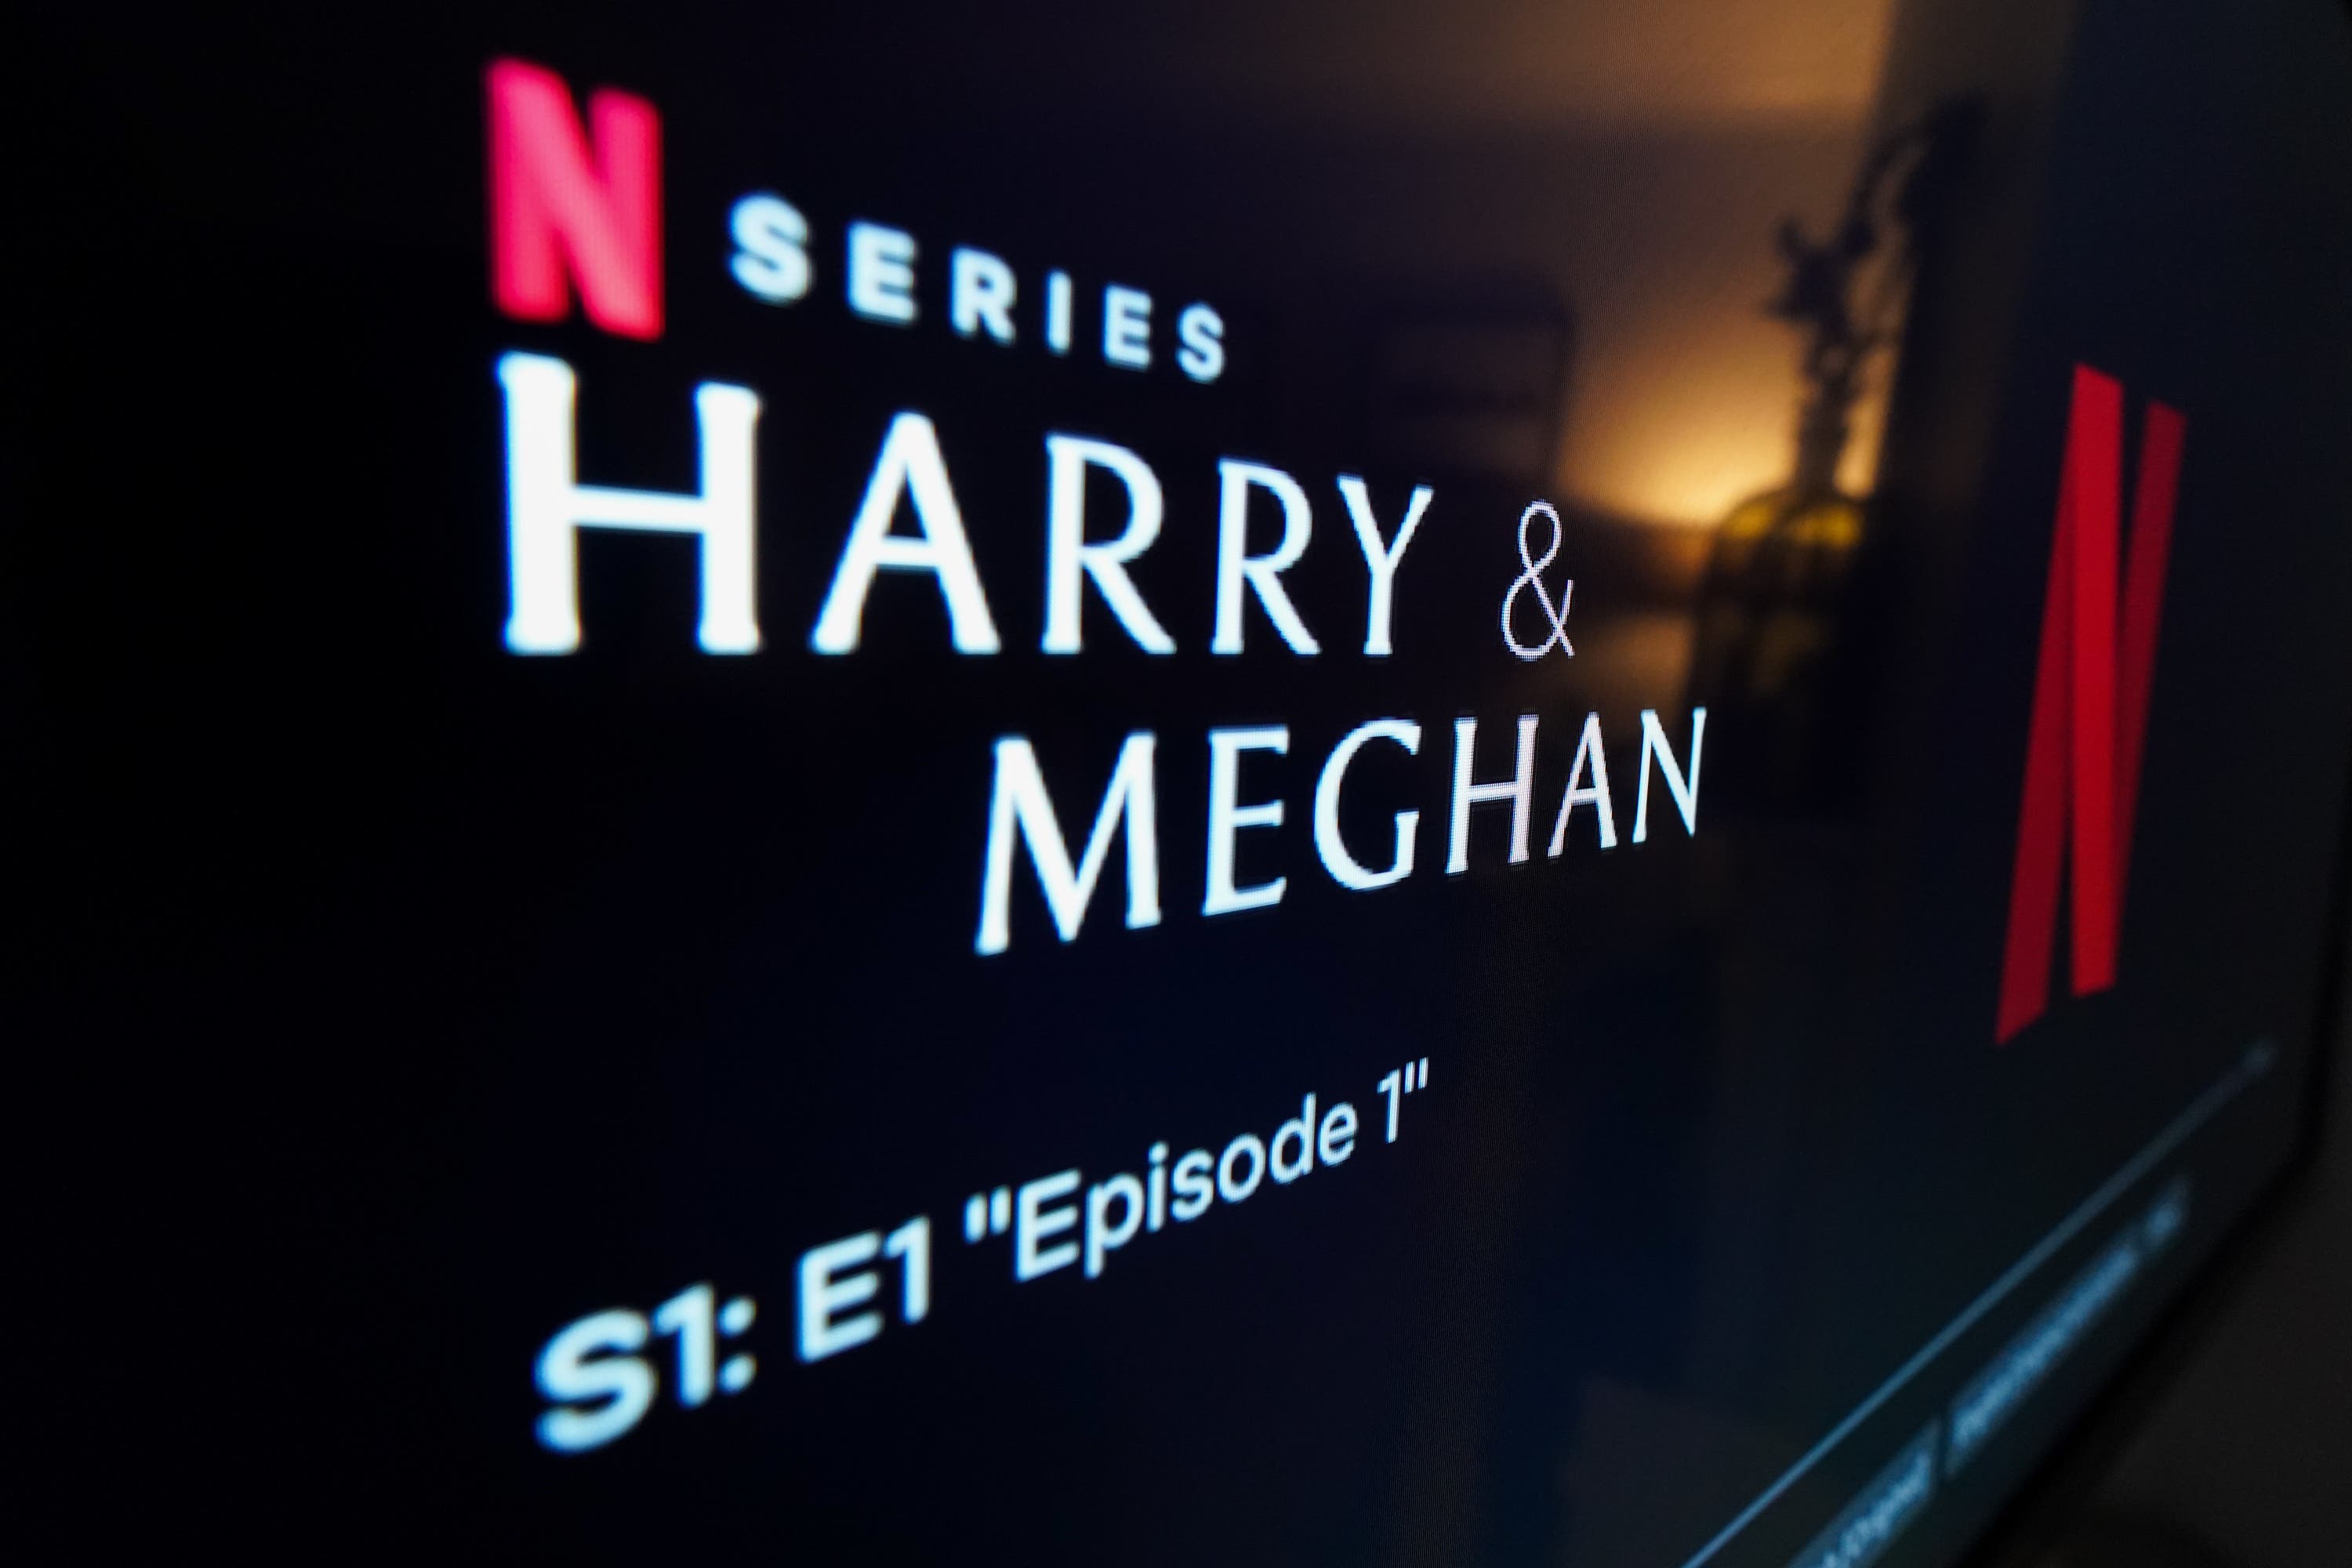 Users could lose access to the smash-hit Harry & Meghan Netflix show.